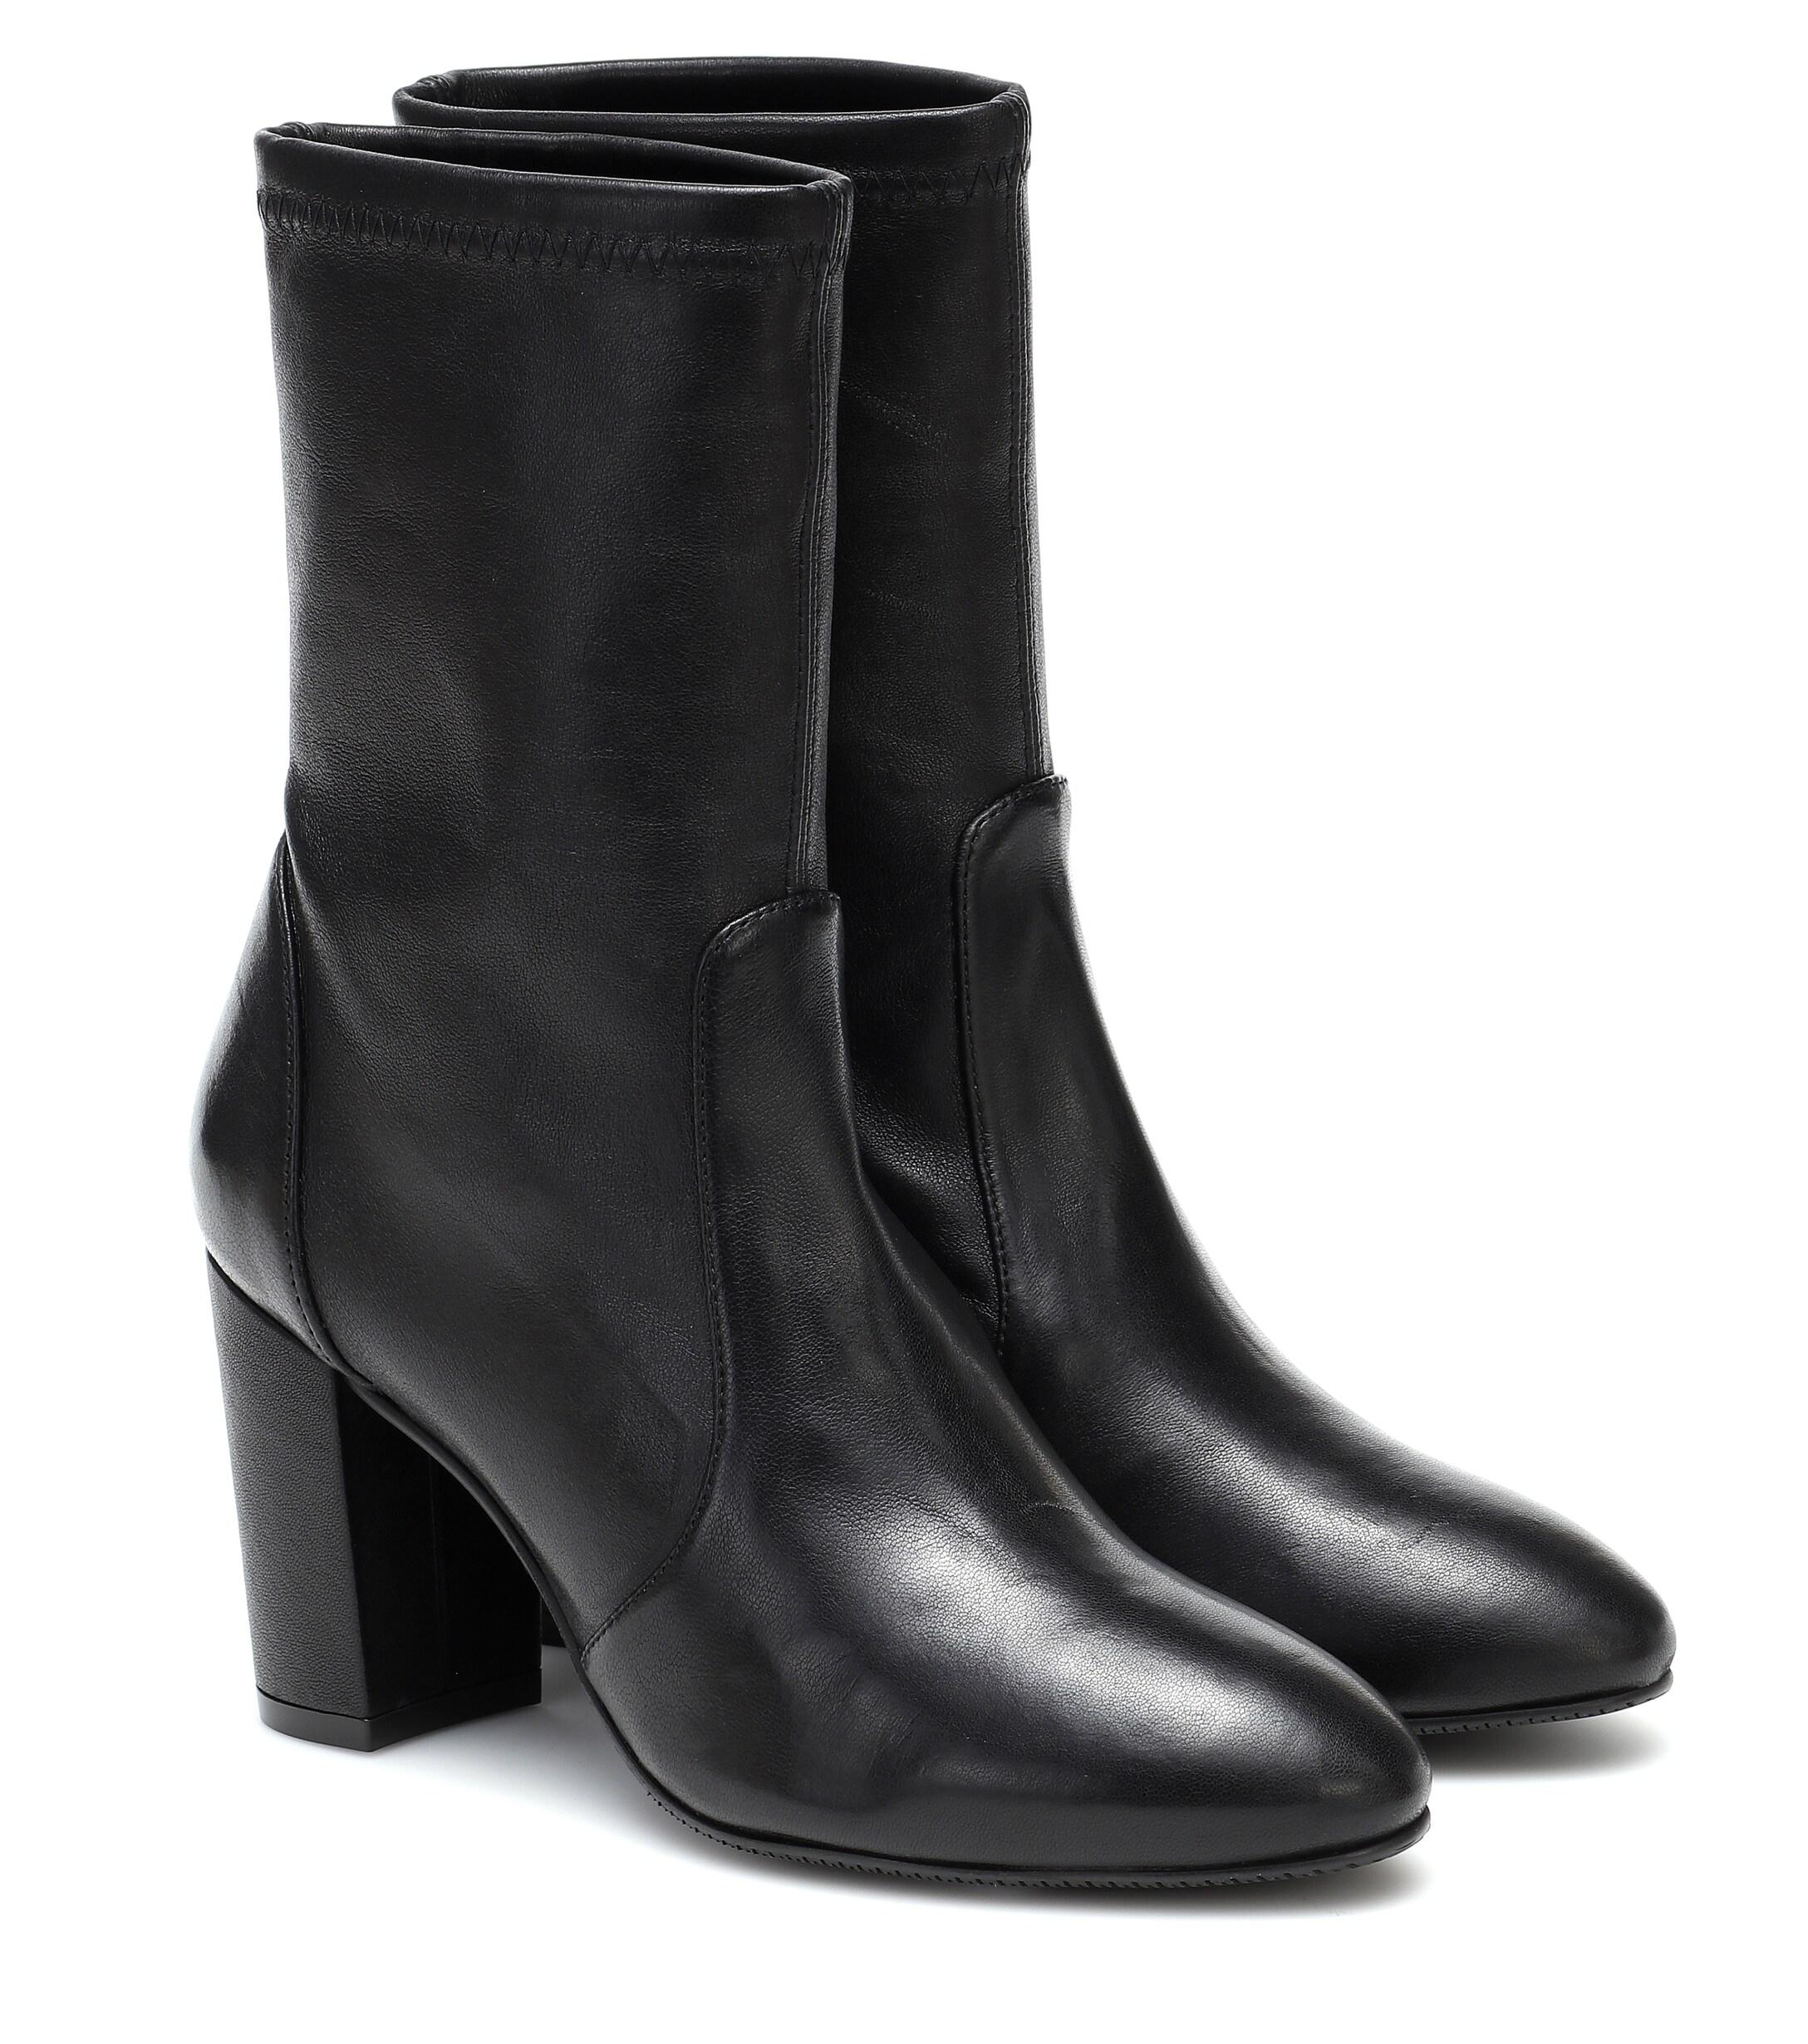 Stuart Weitzman Yuliana Leather Ankle Boots in Black - Lyst